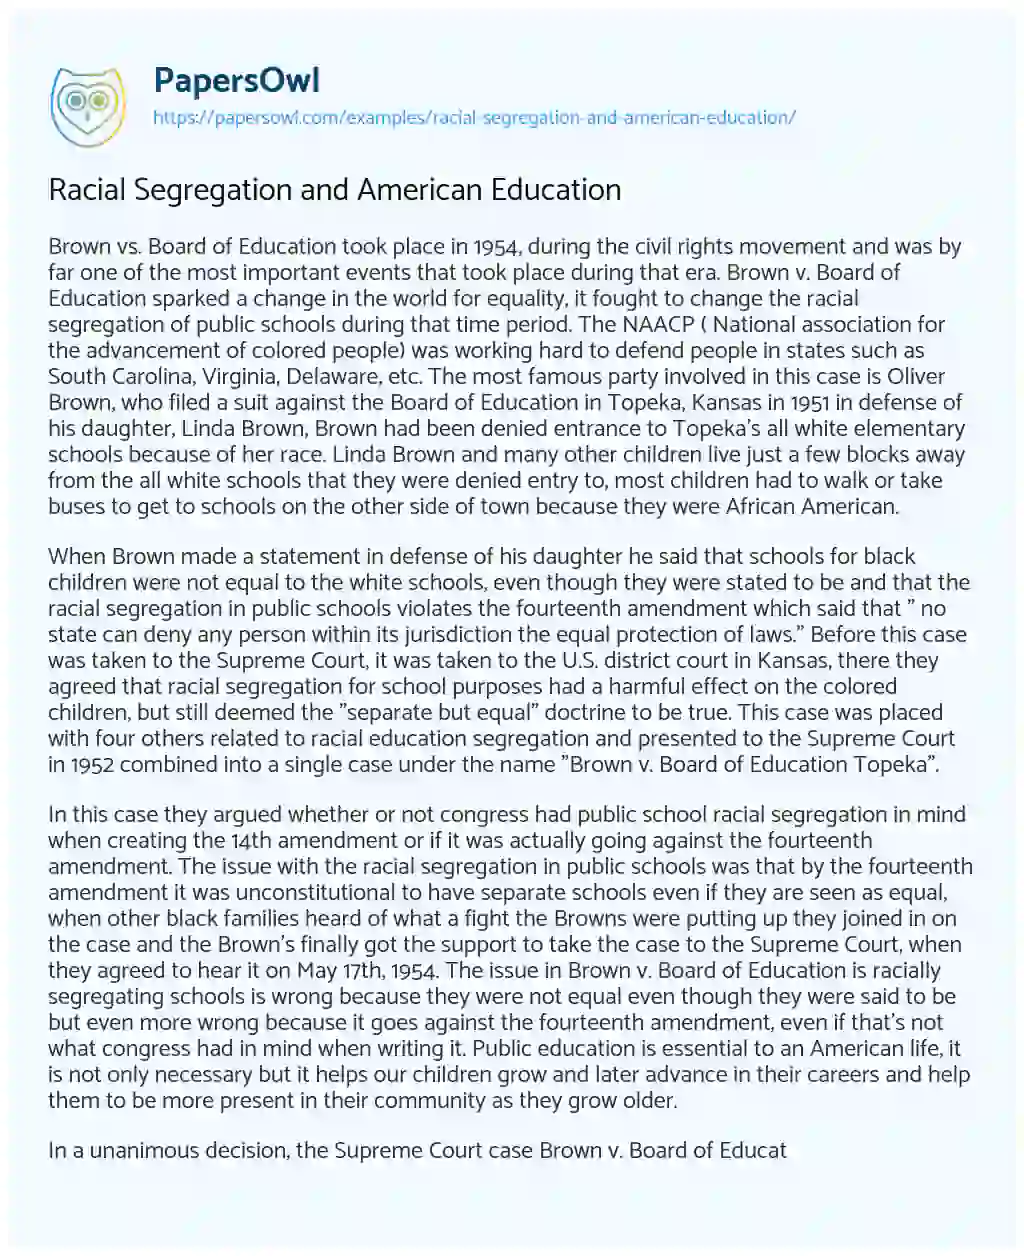 Essay on Racial Segregation and American Education